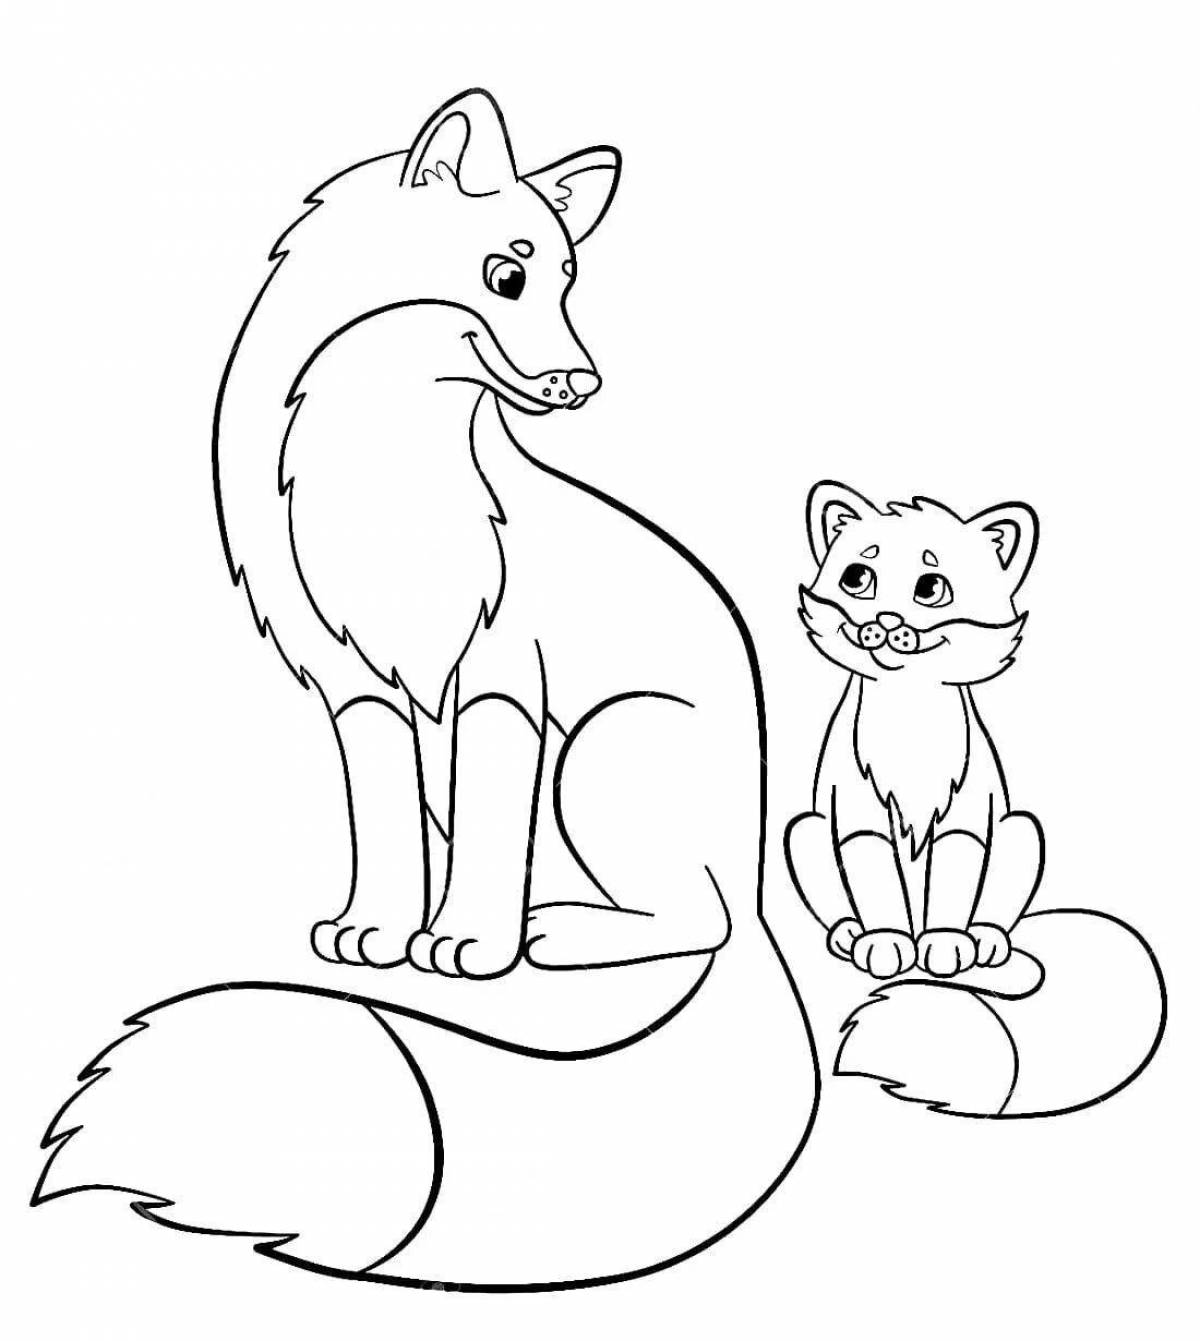 Awesome wild animal and baby coloring page